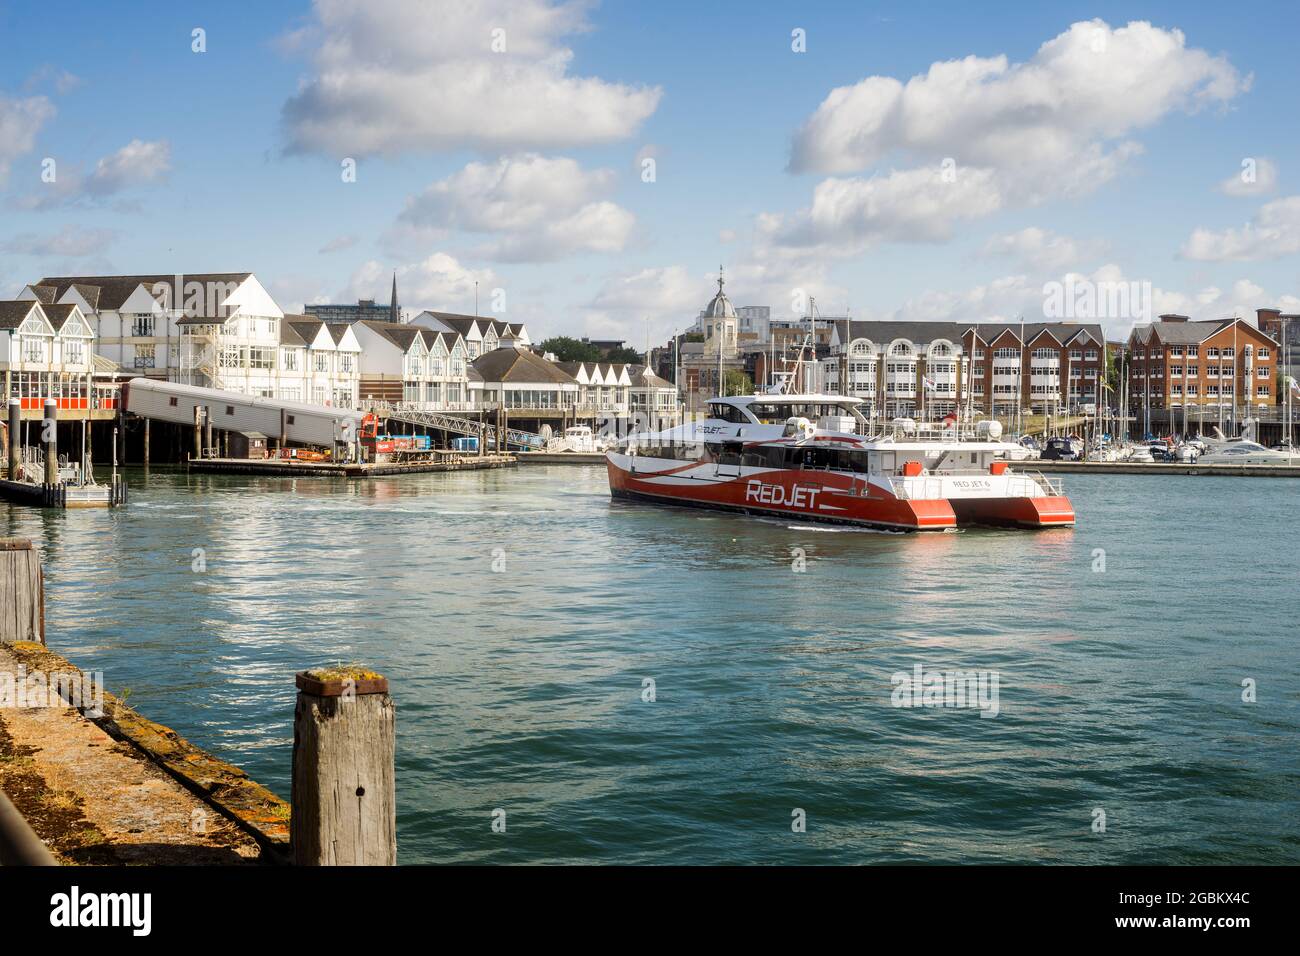 A Red Jet fast catamaran passenger ferry reversing away from T2 terminal at  Town Quay, Southampton as it departs for Cowes, Isle of Wight Stock Photo